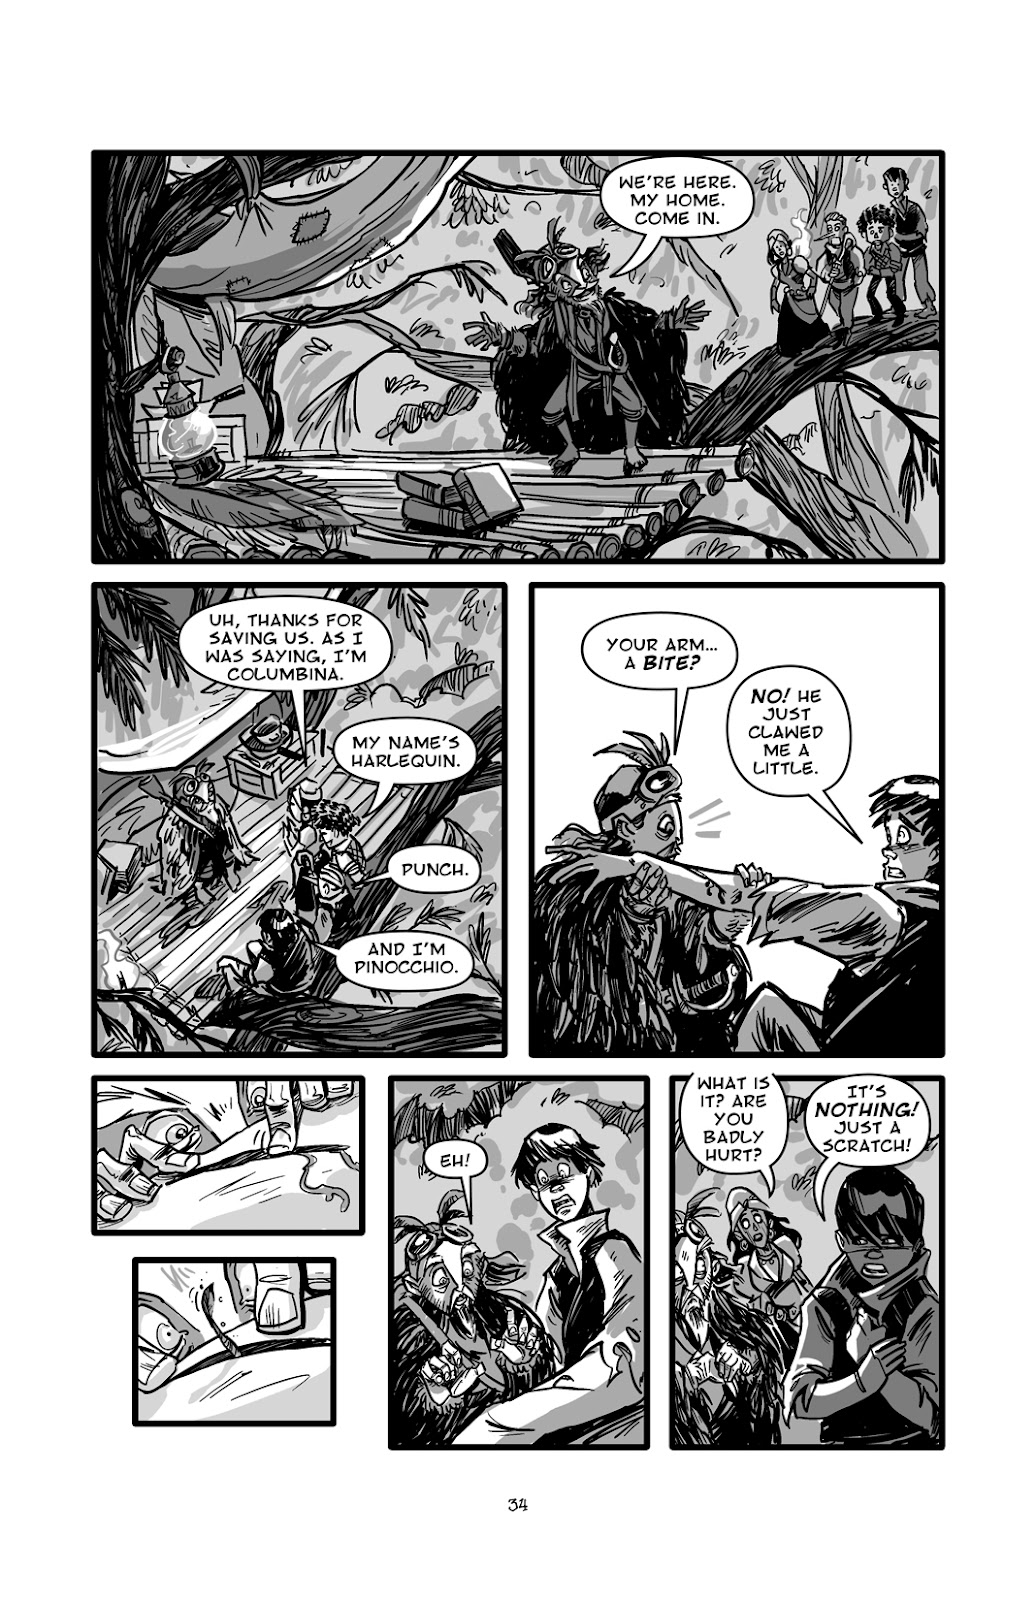 Pinocchio: Vampire Slayer - Of Wood and Blood issue 2 - Page 9